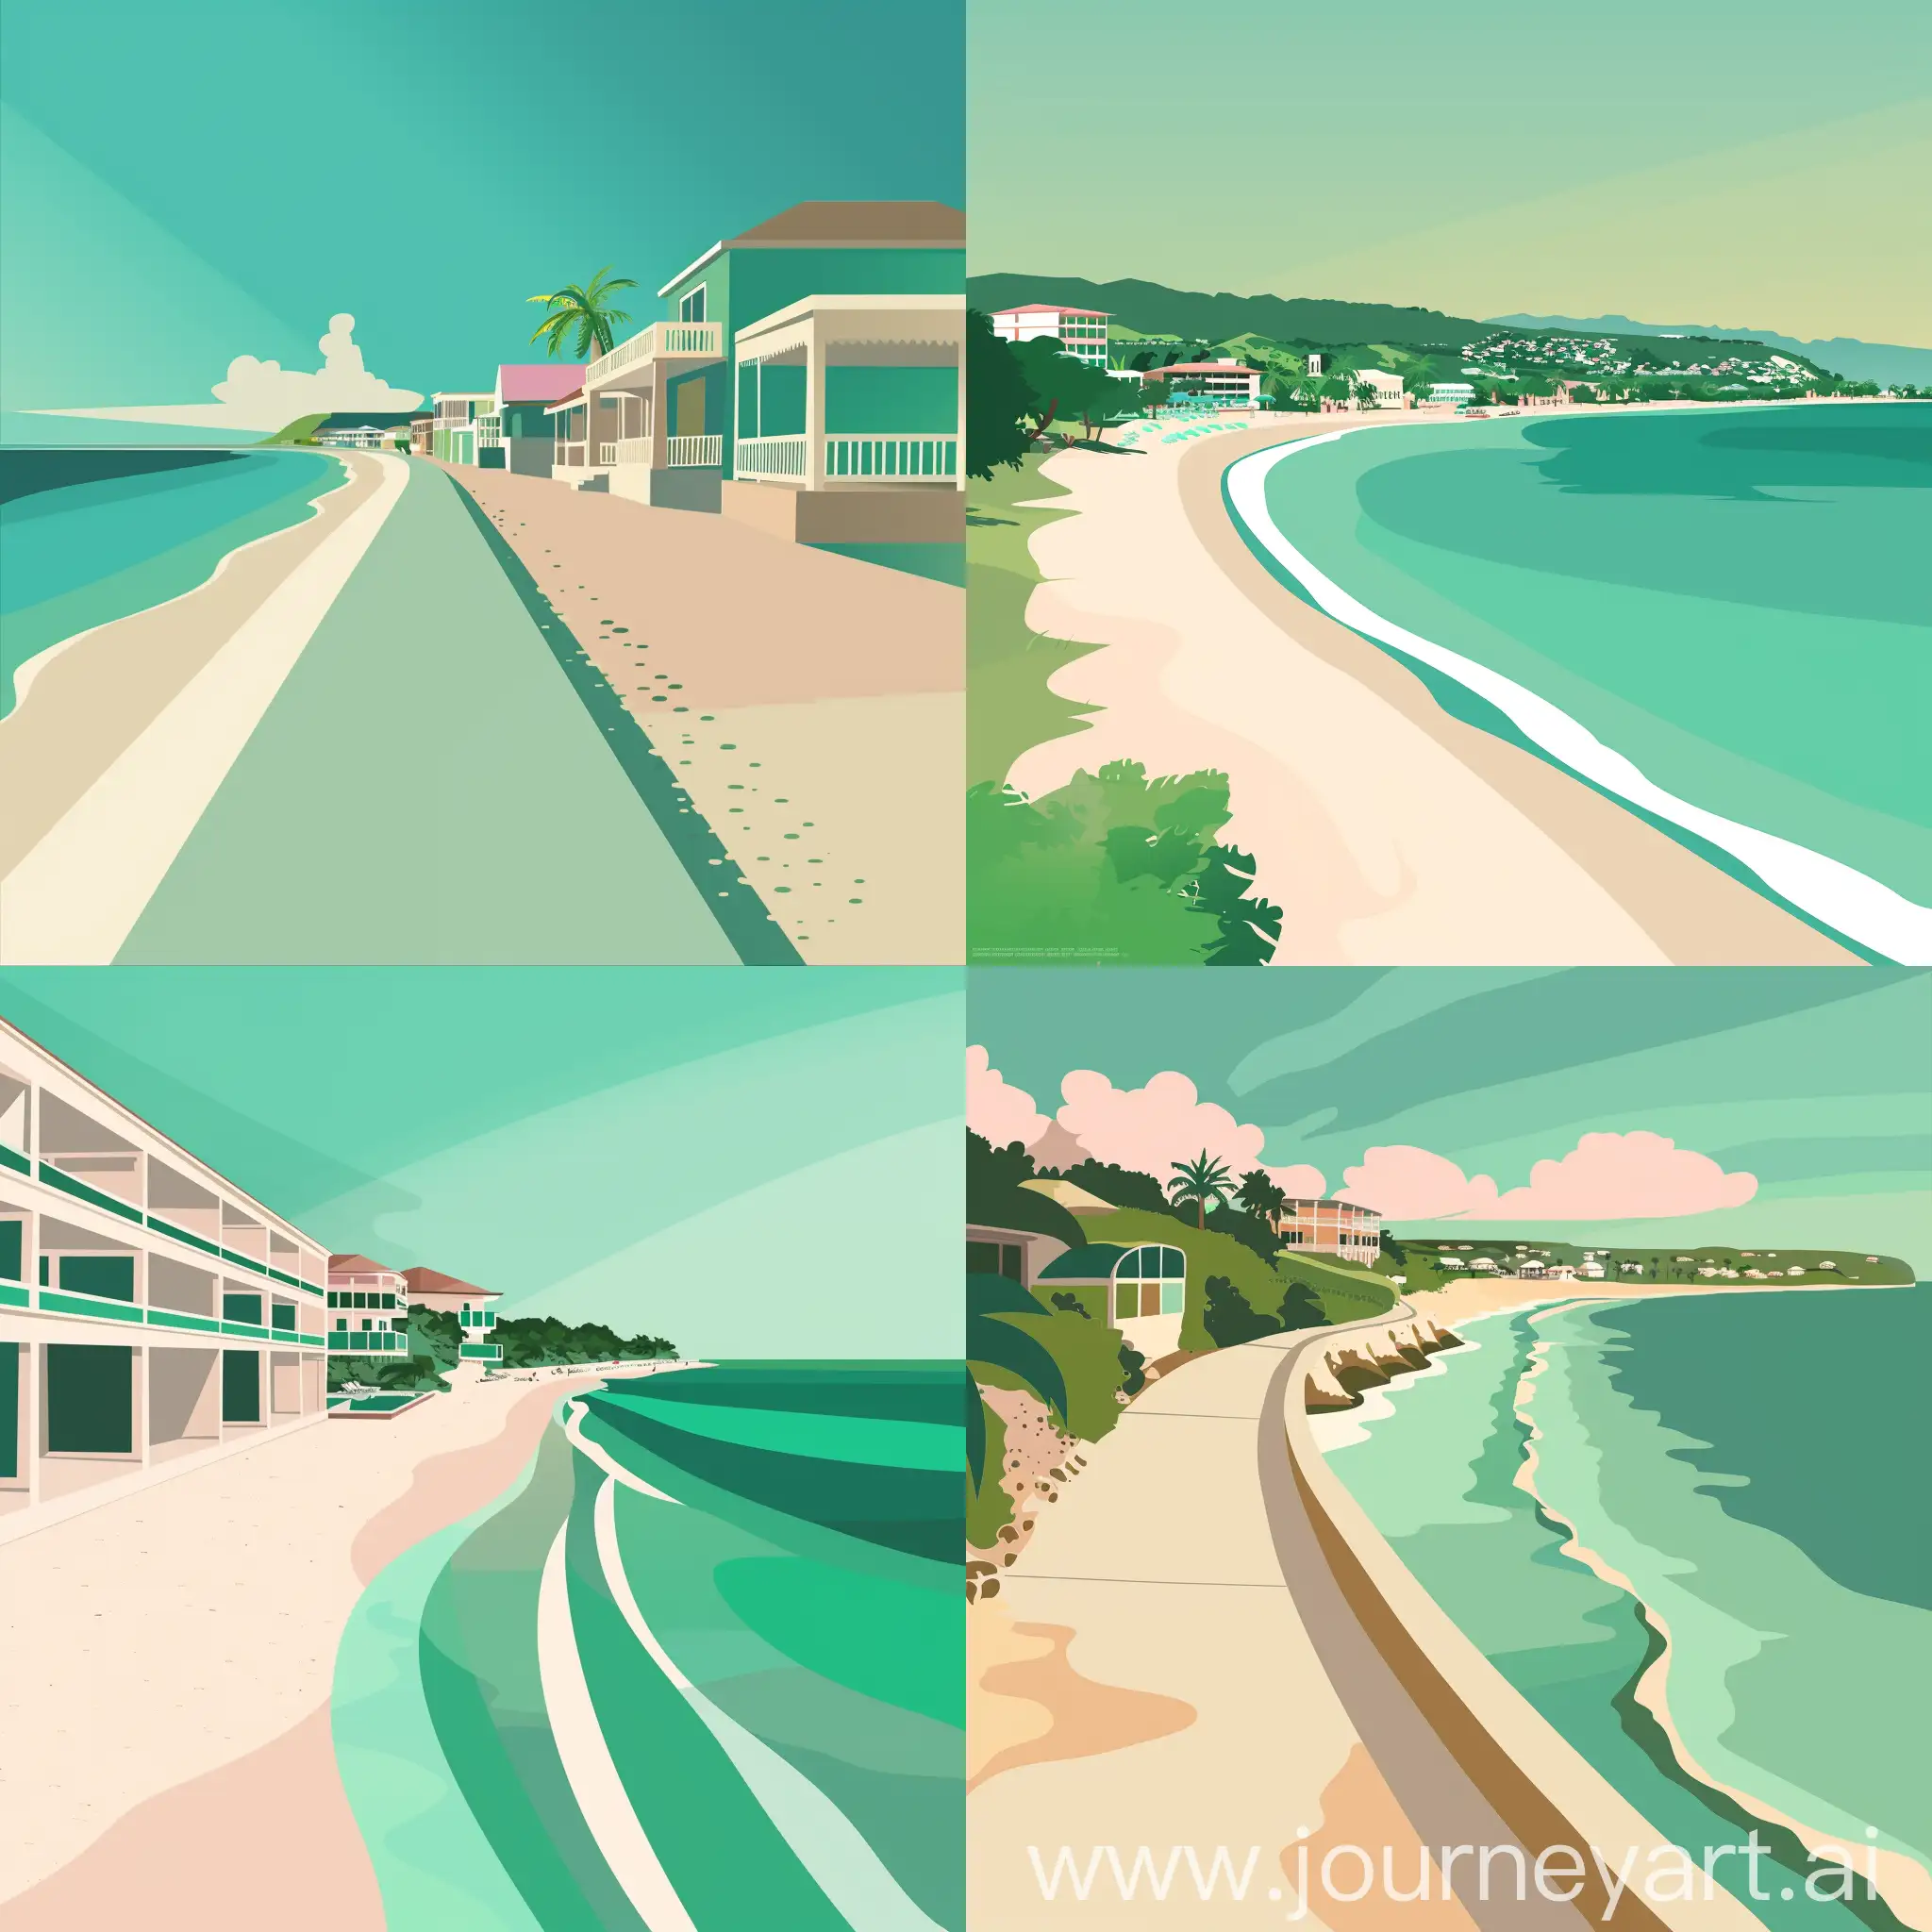 Modern-Flat-Vector-Art-Illustration-of-Negril-Jamaica-Beach-Scene-in-Turquoise-Green-and-Beige-Colors